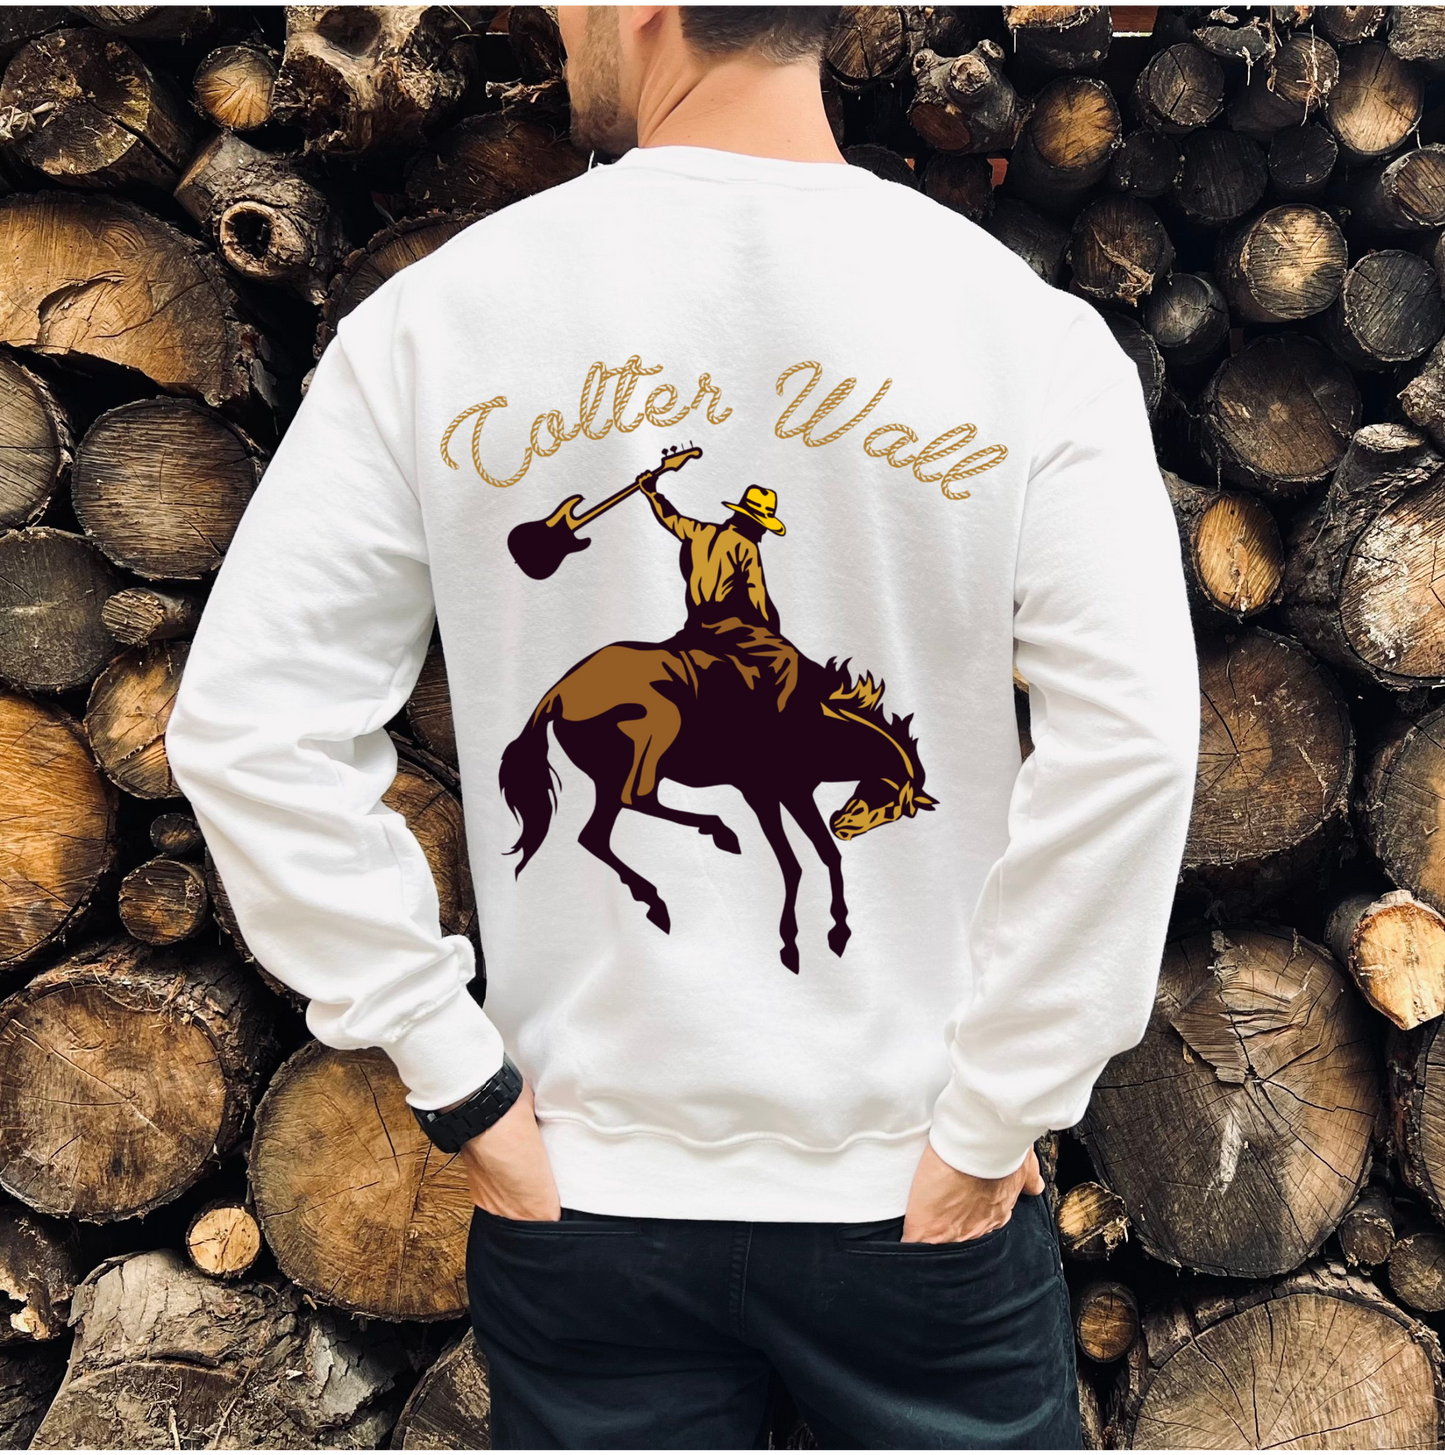 Colter Wall Rodeo Sweatshirt